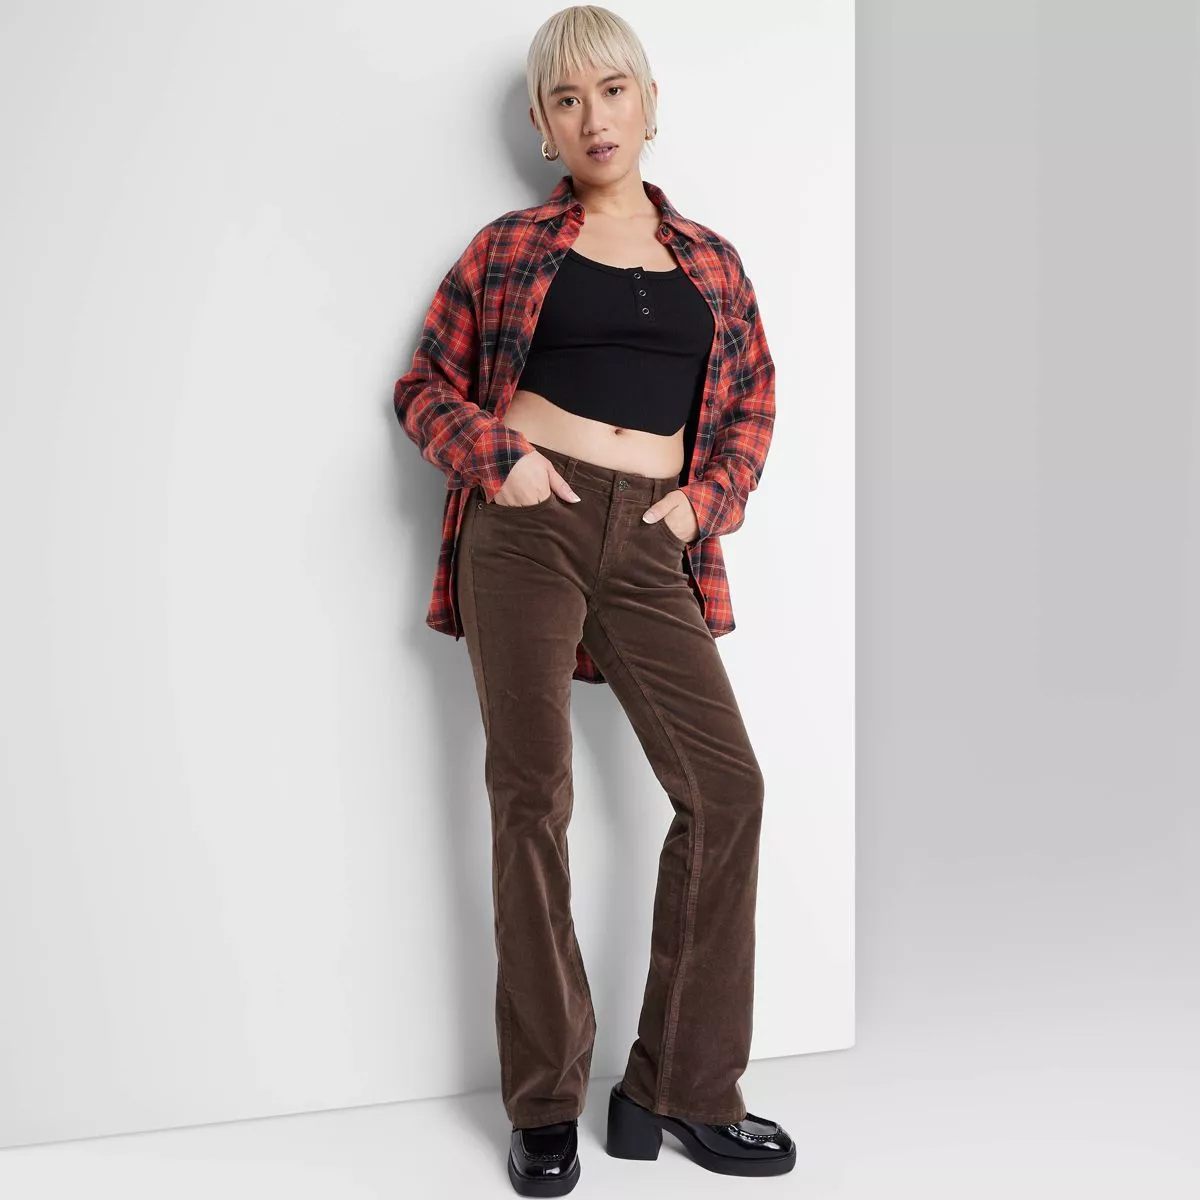 Women's Mid-Rise Corduroy Flare Pants - Wild Fable Rust 2